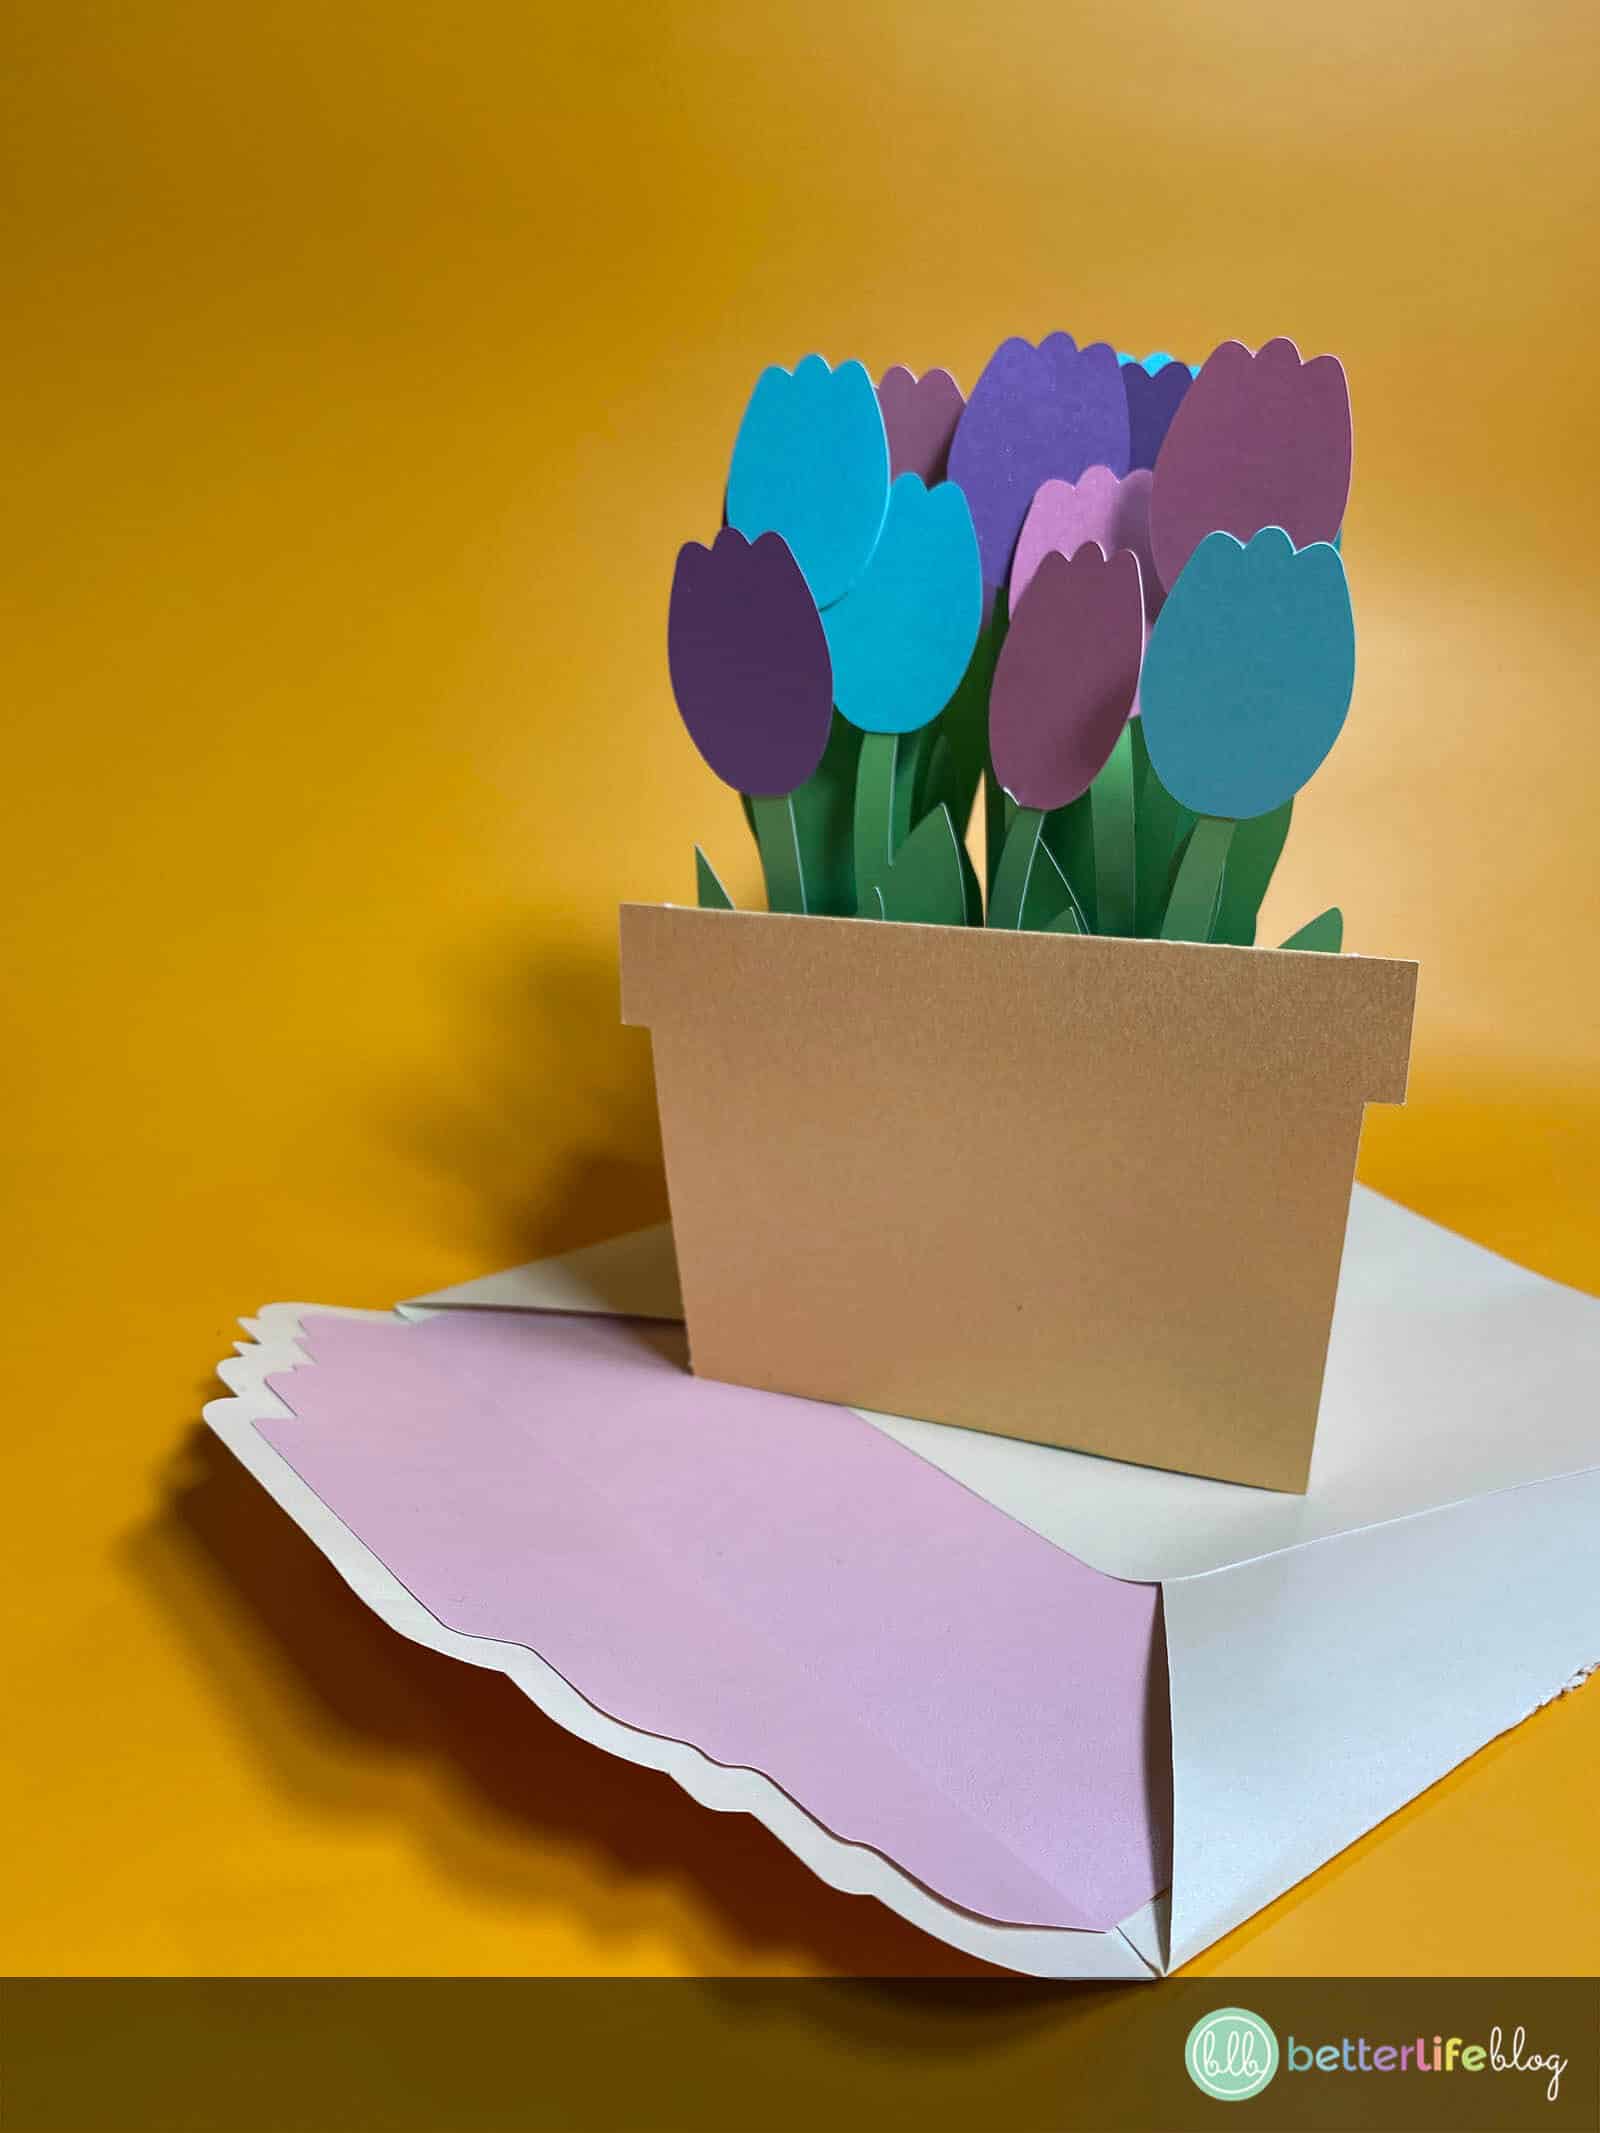 Our 3D Tulip Gift Card Holder complete